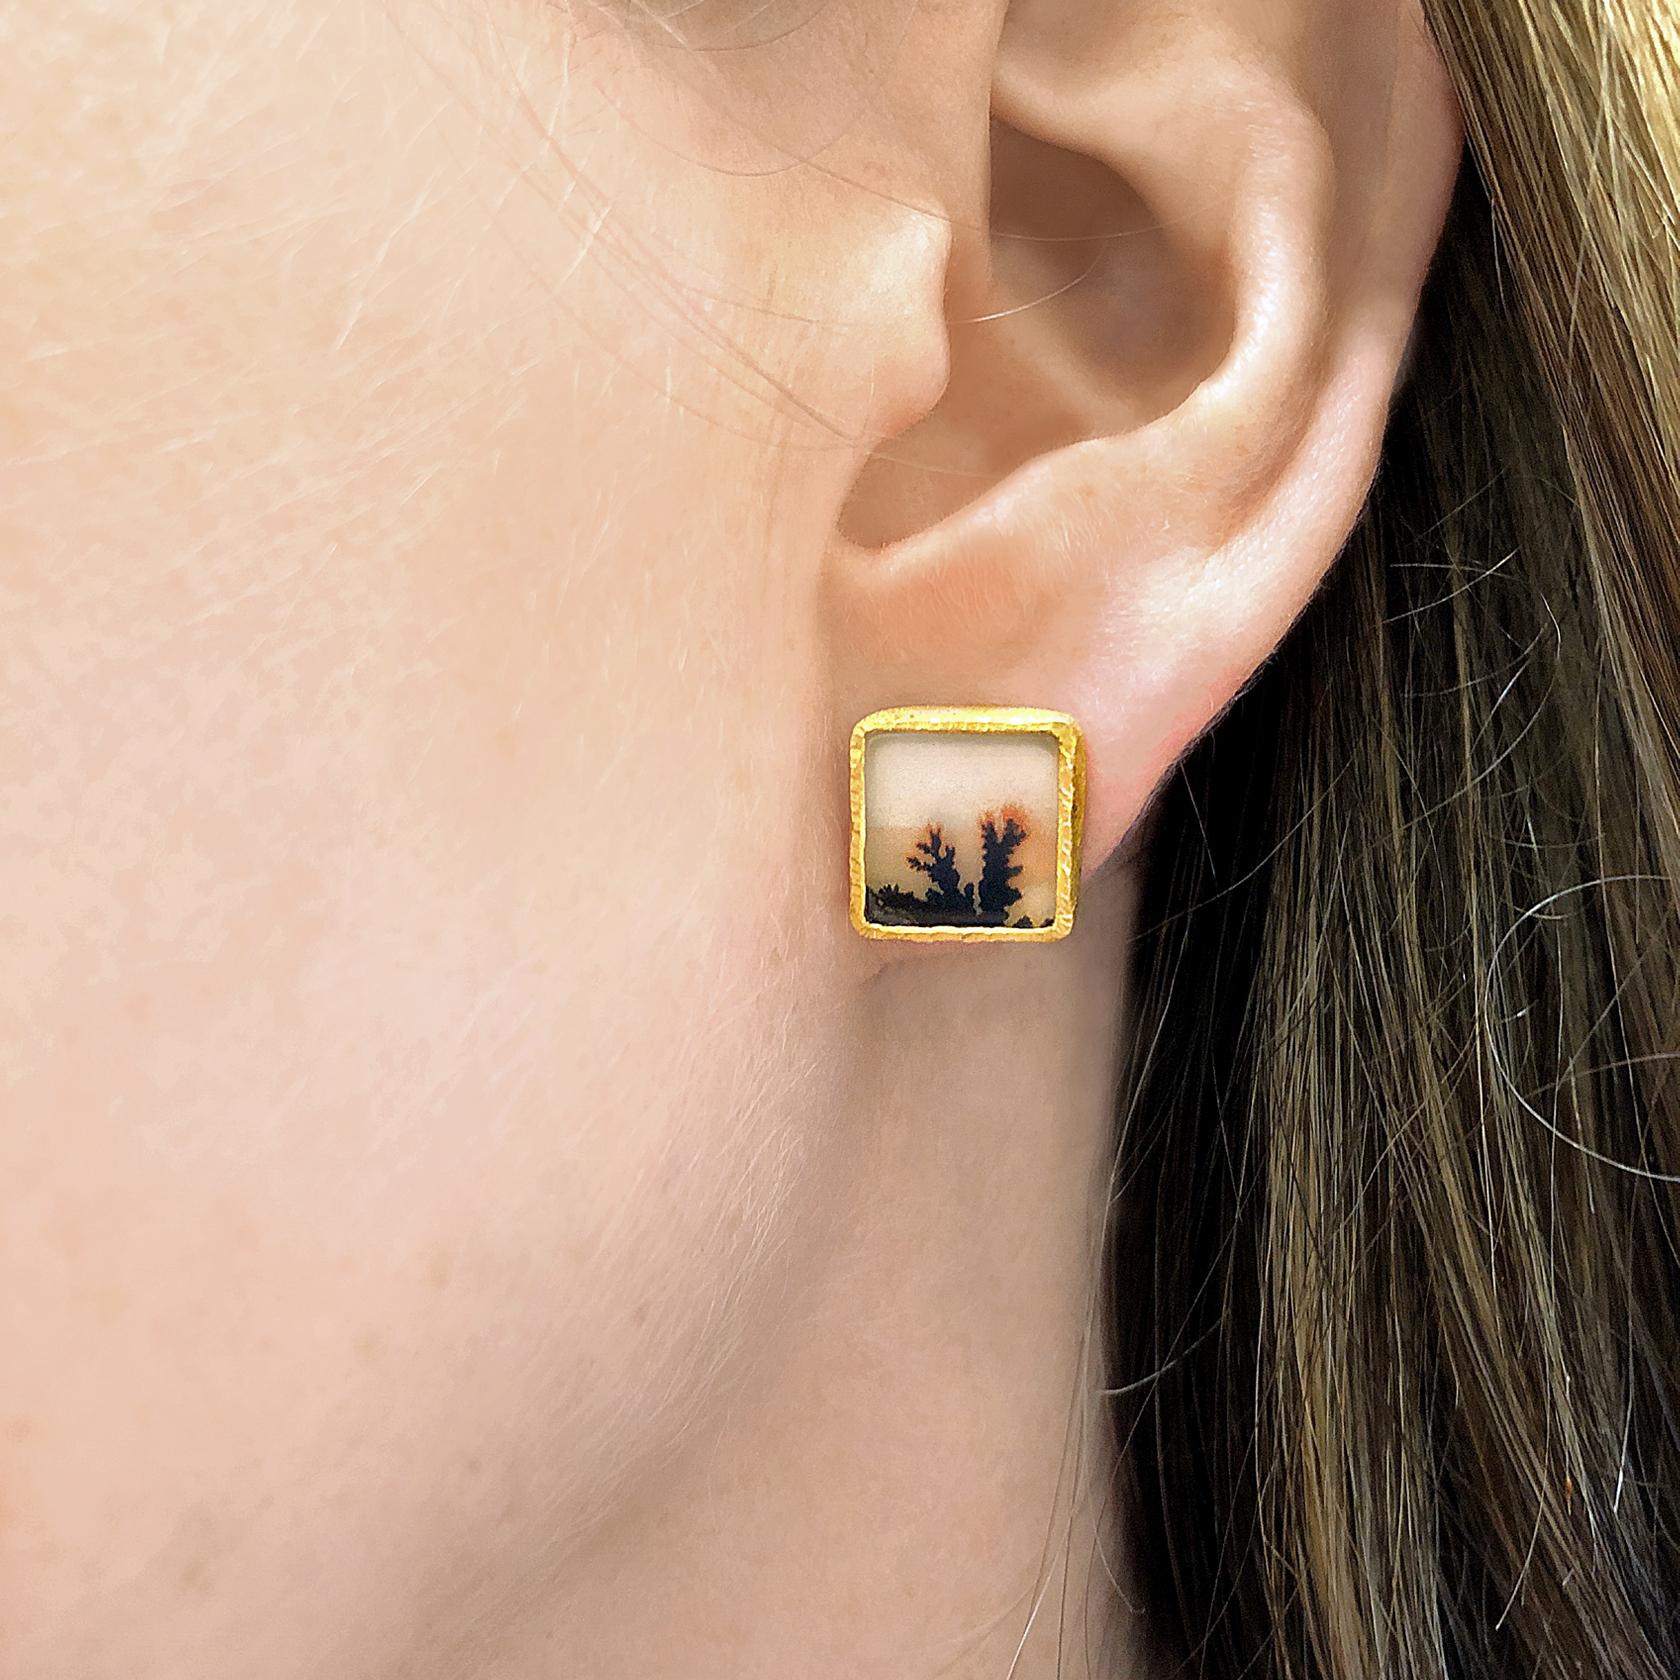 One of a Kind Stud Earrings hand-fabricated by jewelry maker Devta Doolan in a the artist's signature-finished 22k yellow gold showcasing a stunning matched pair of natural dendritic agate and finished with a pair of 18k yellow gold posts and backs.